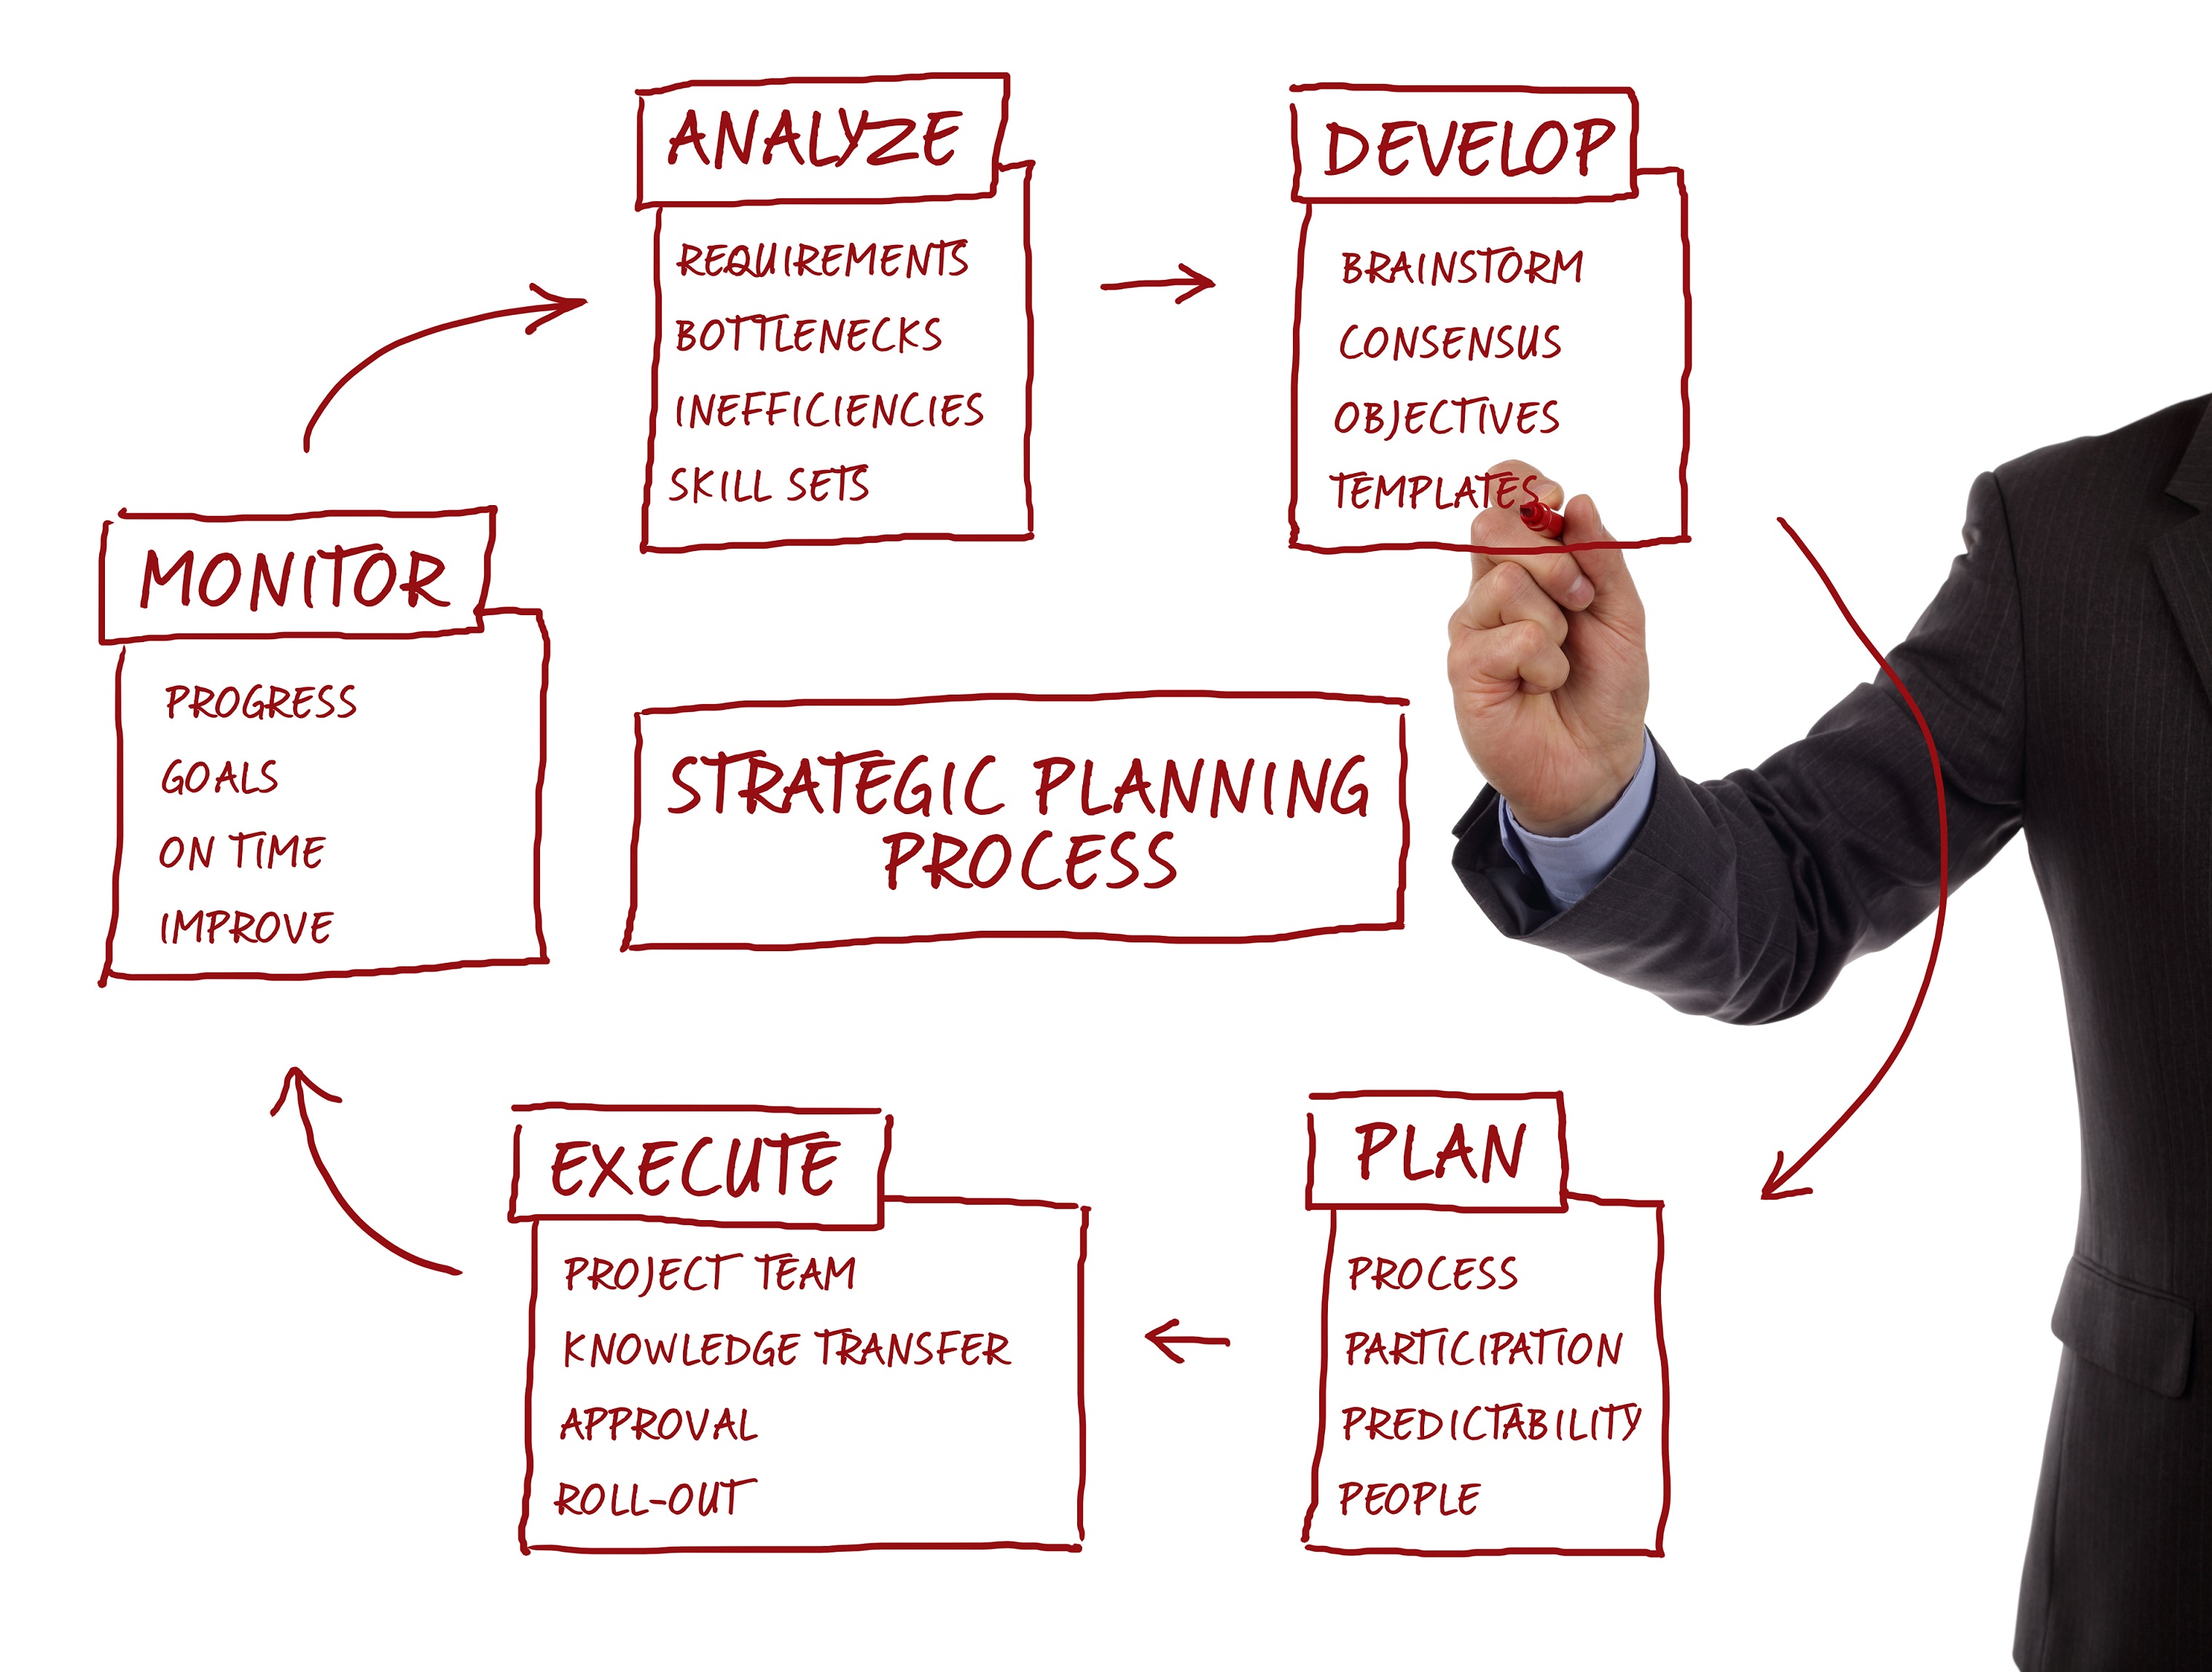 critique of the business planning process